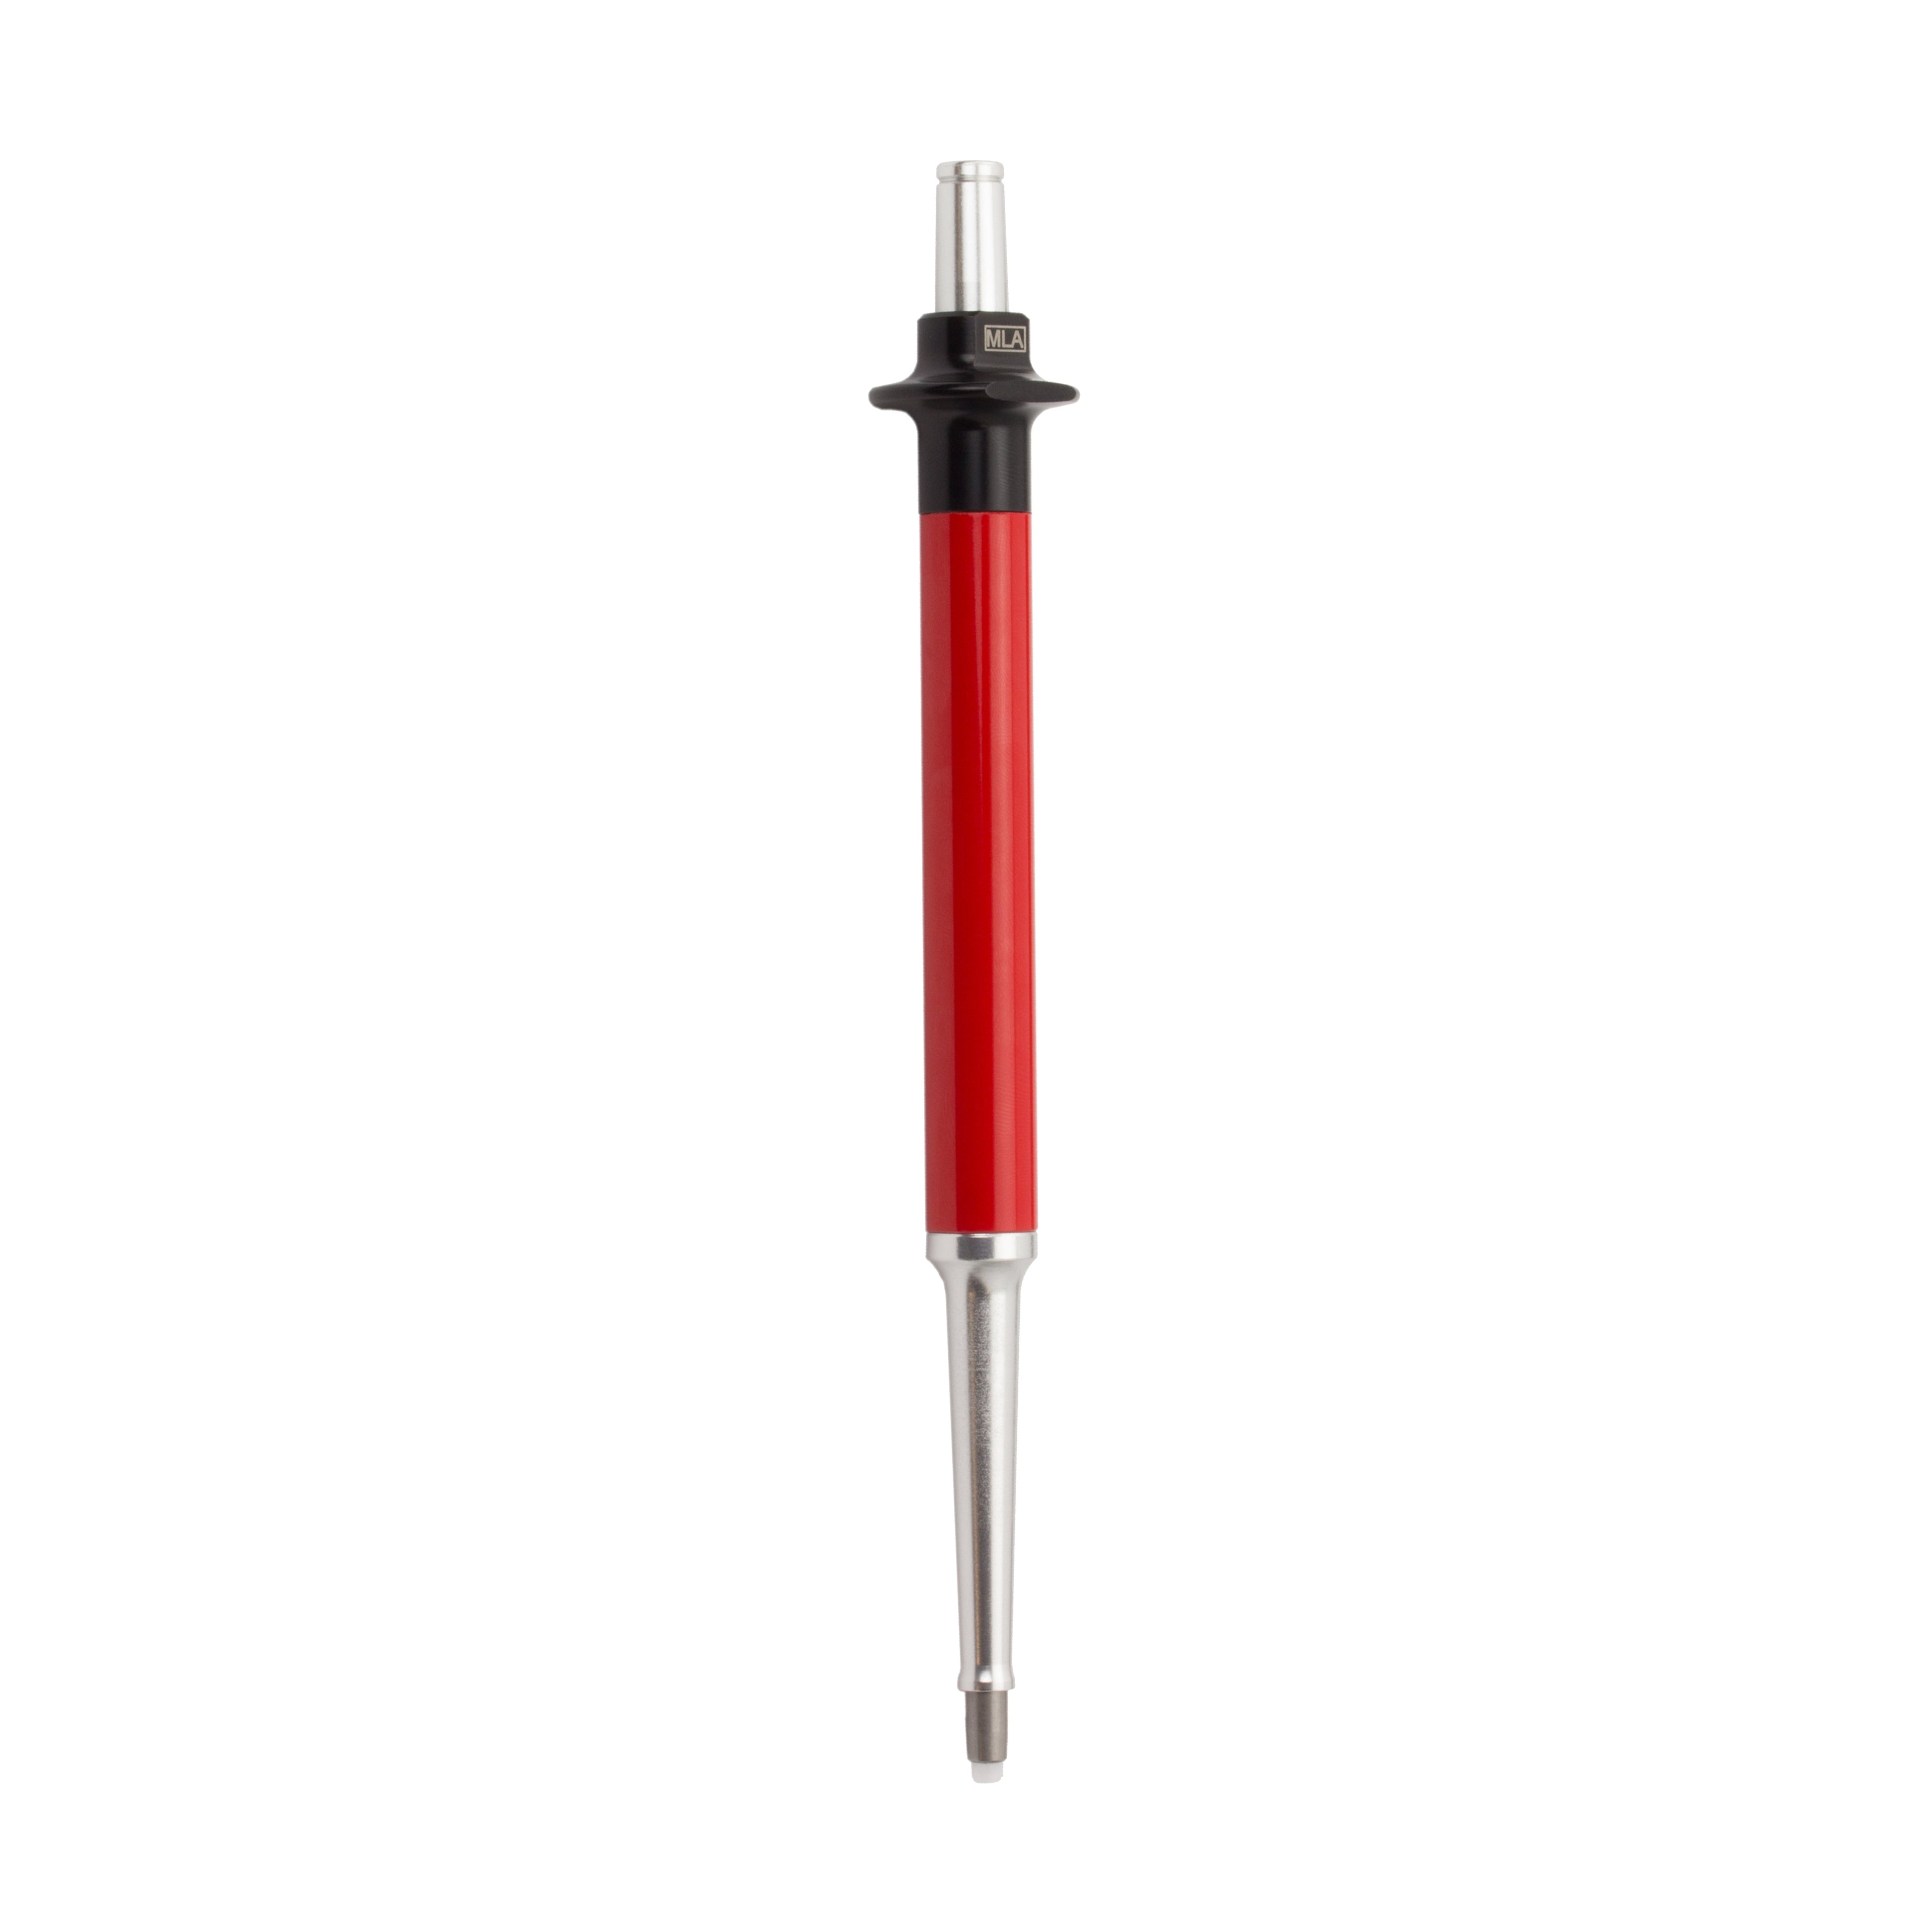 VistaLab 1802 Fixed-Volume Pipette, 2 uL, Red